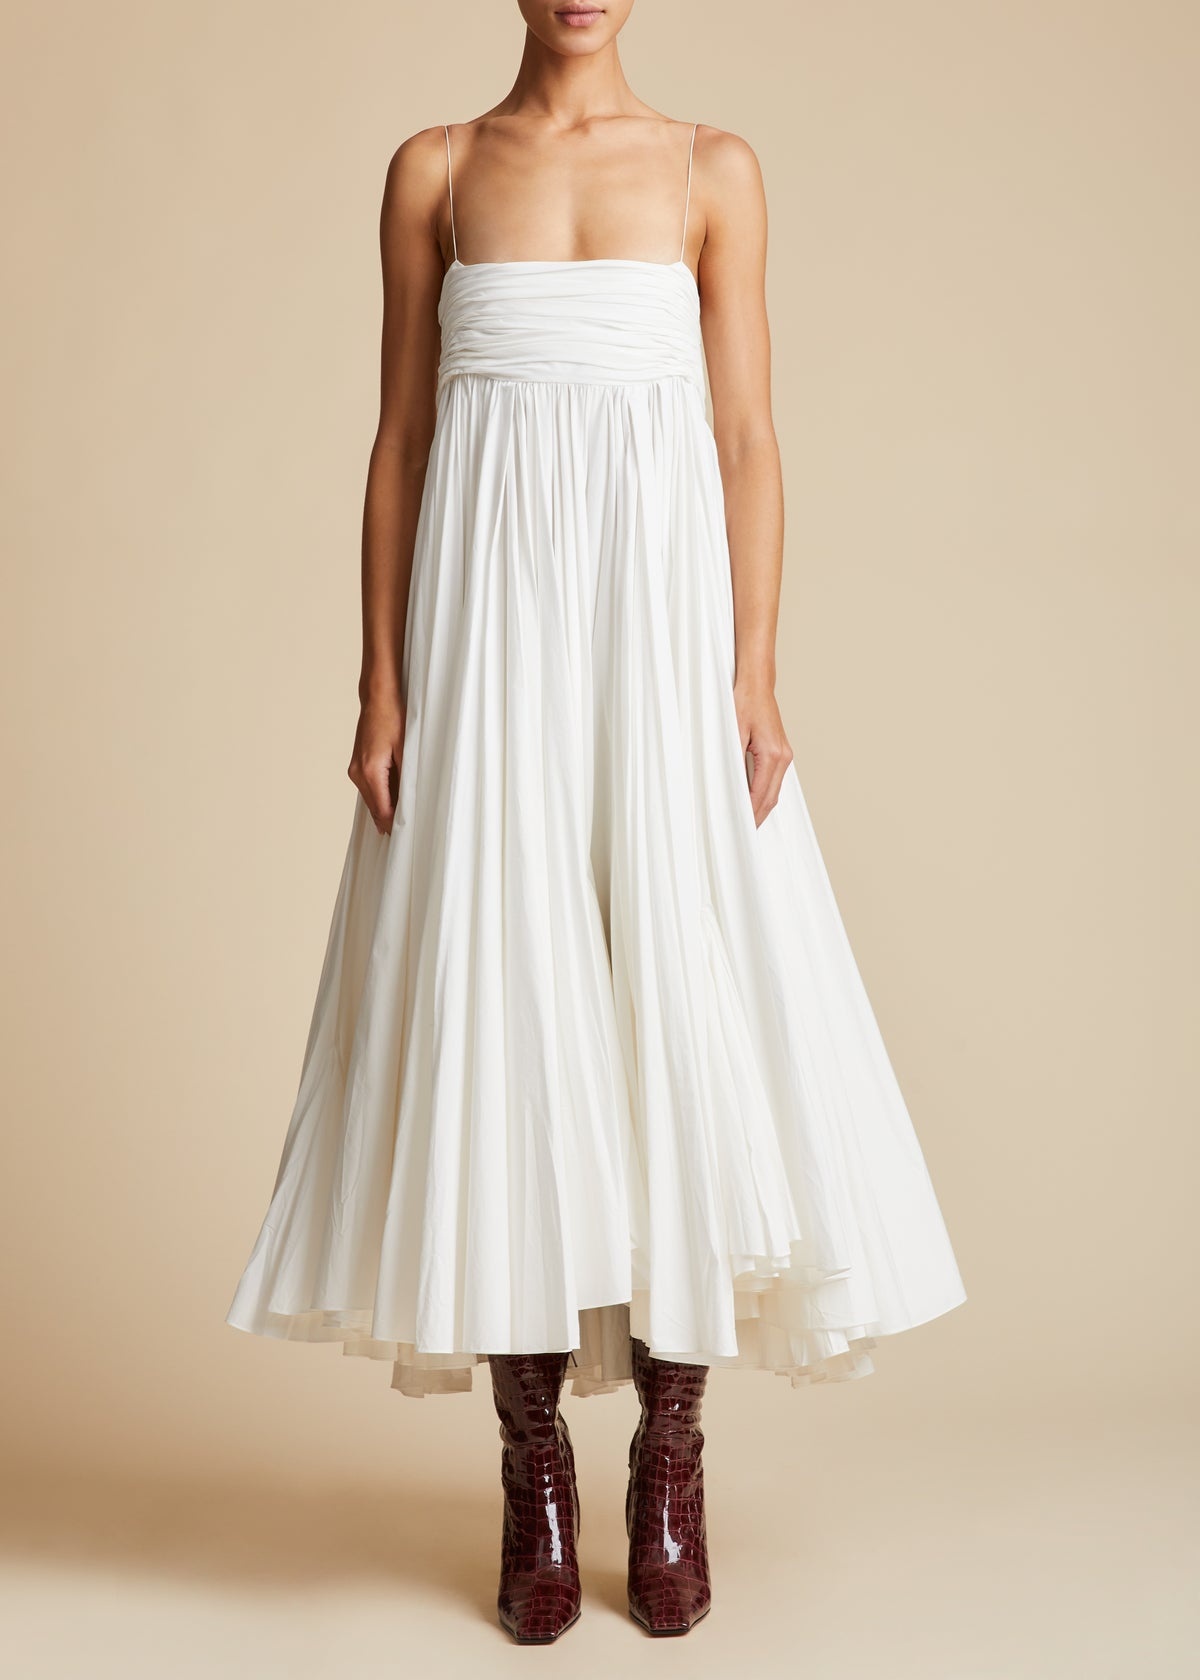 The Lally Dress in White - 1